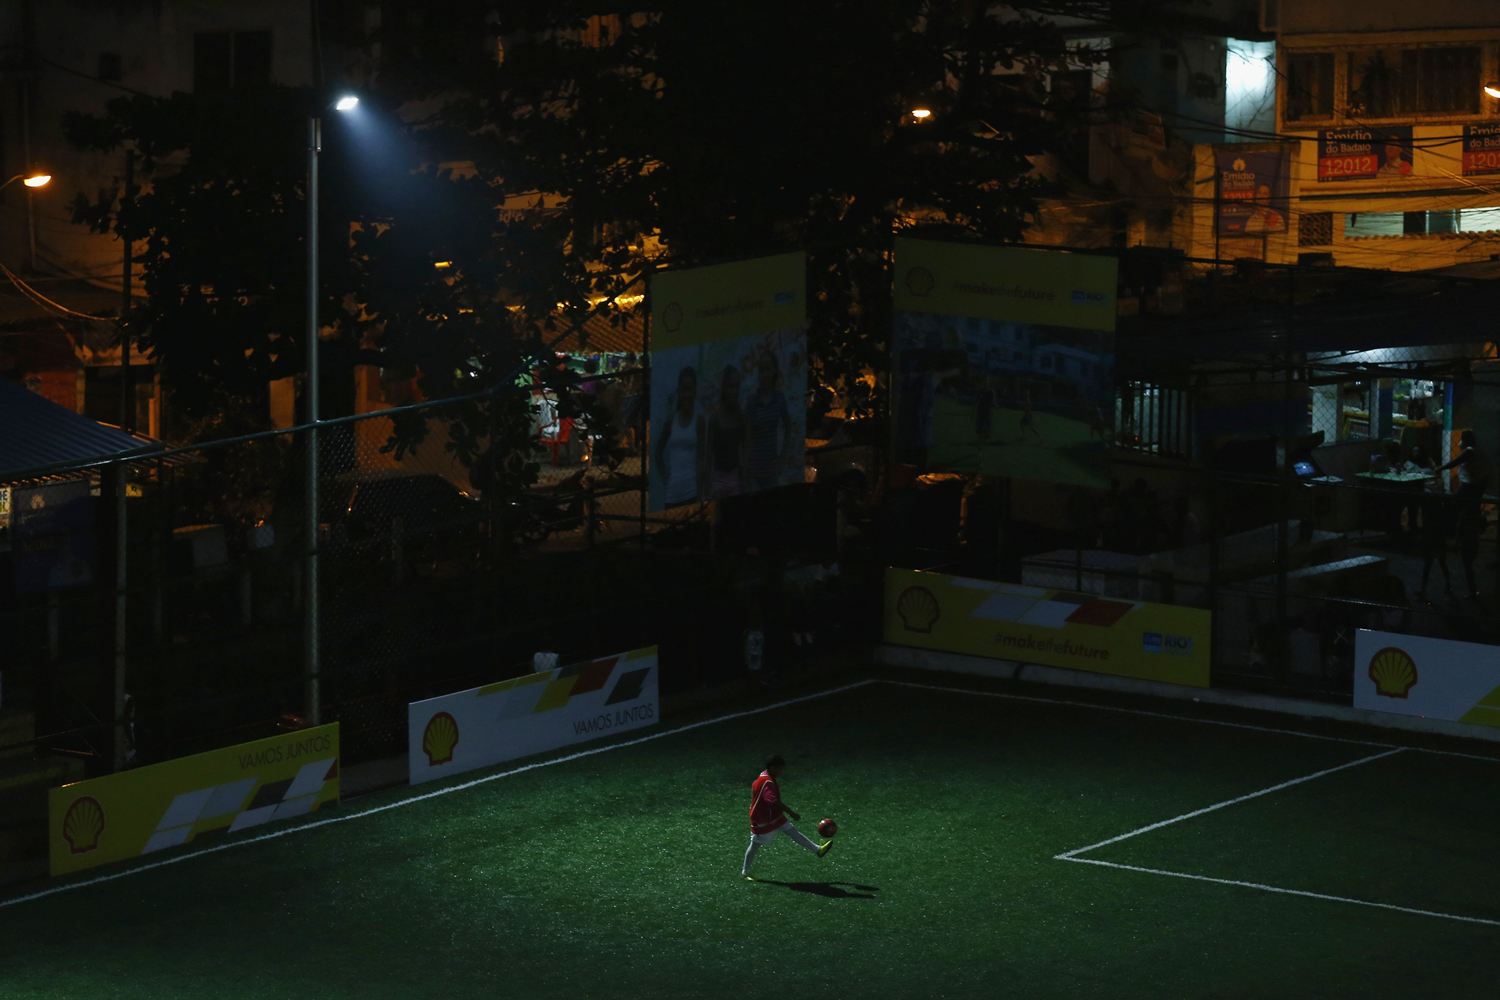 Kid plays with soccer ball at a refurbished soccer field at the Mineira slum in Rio de Janeiro